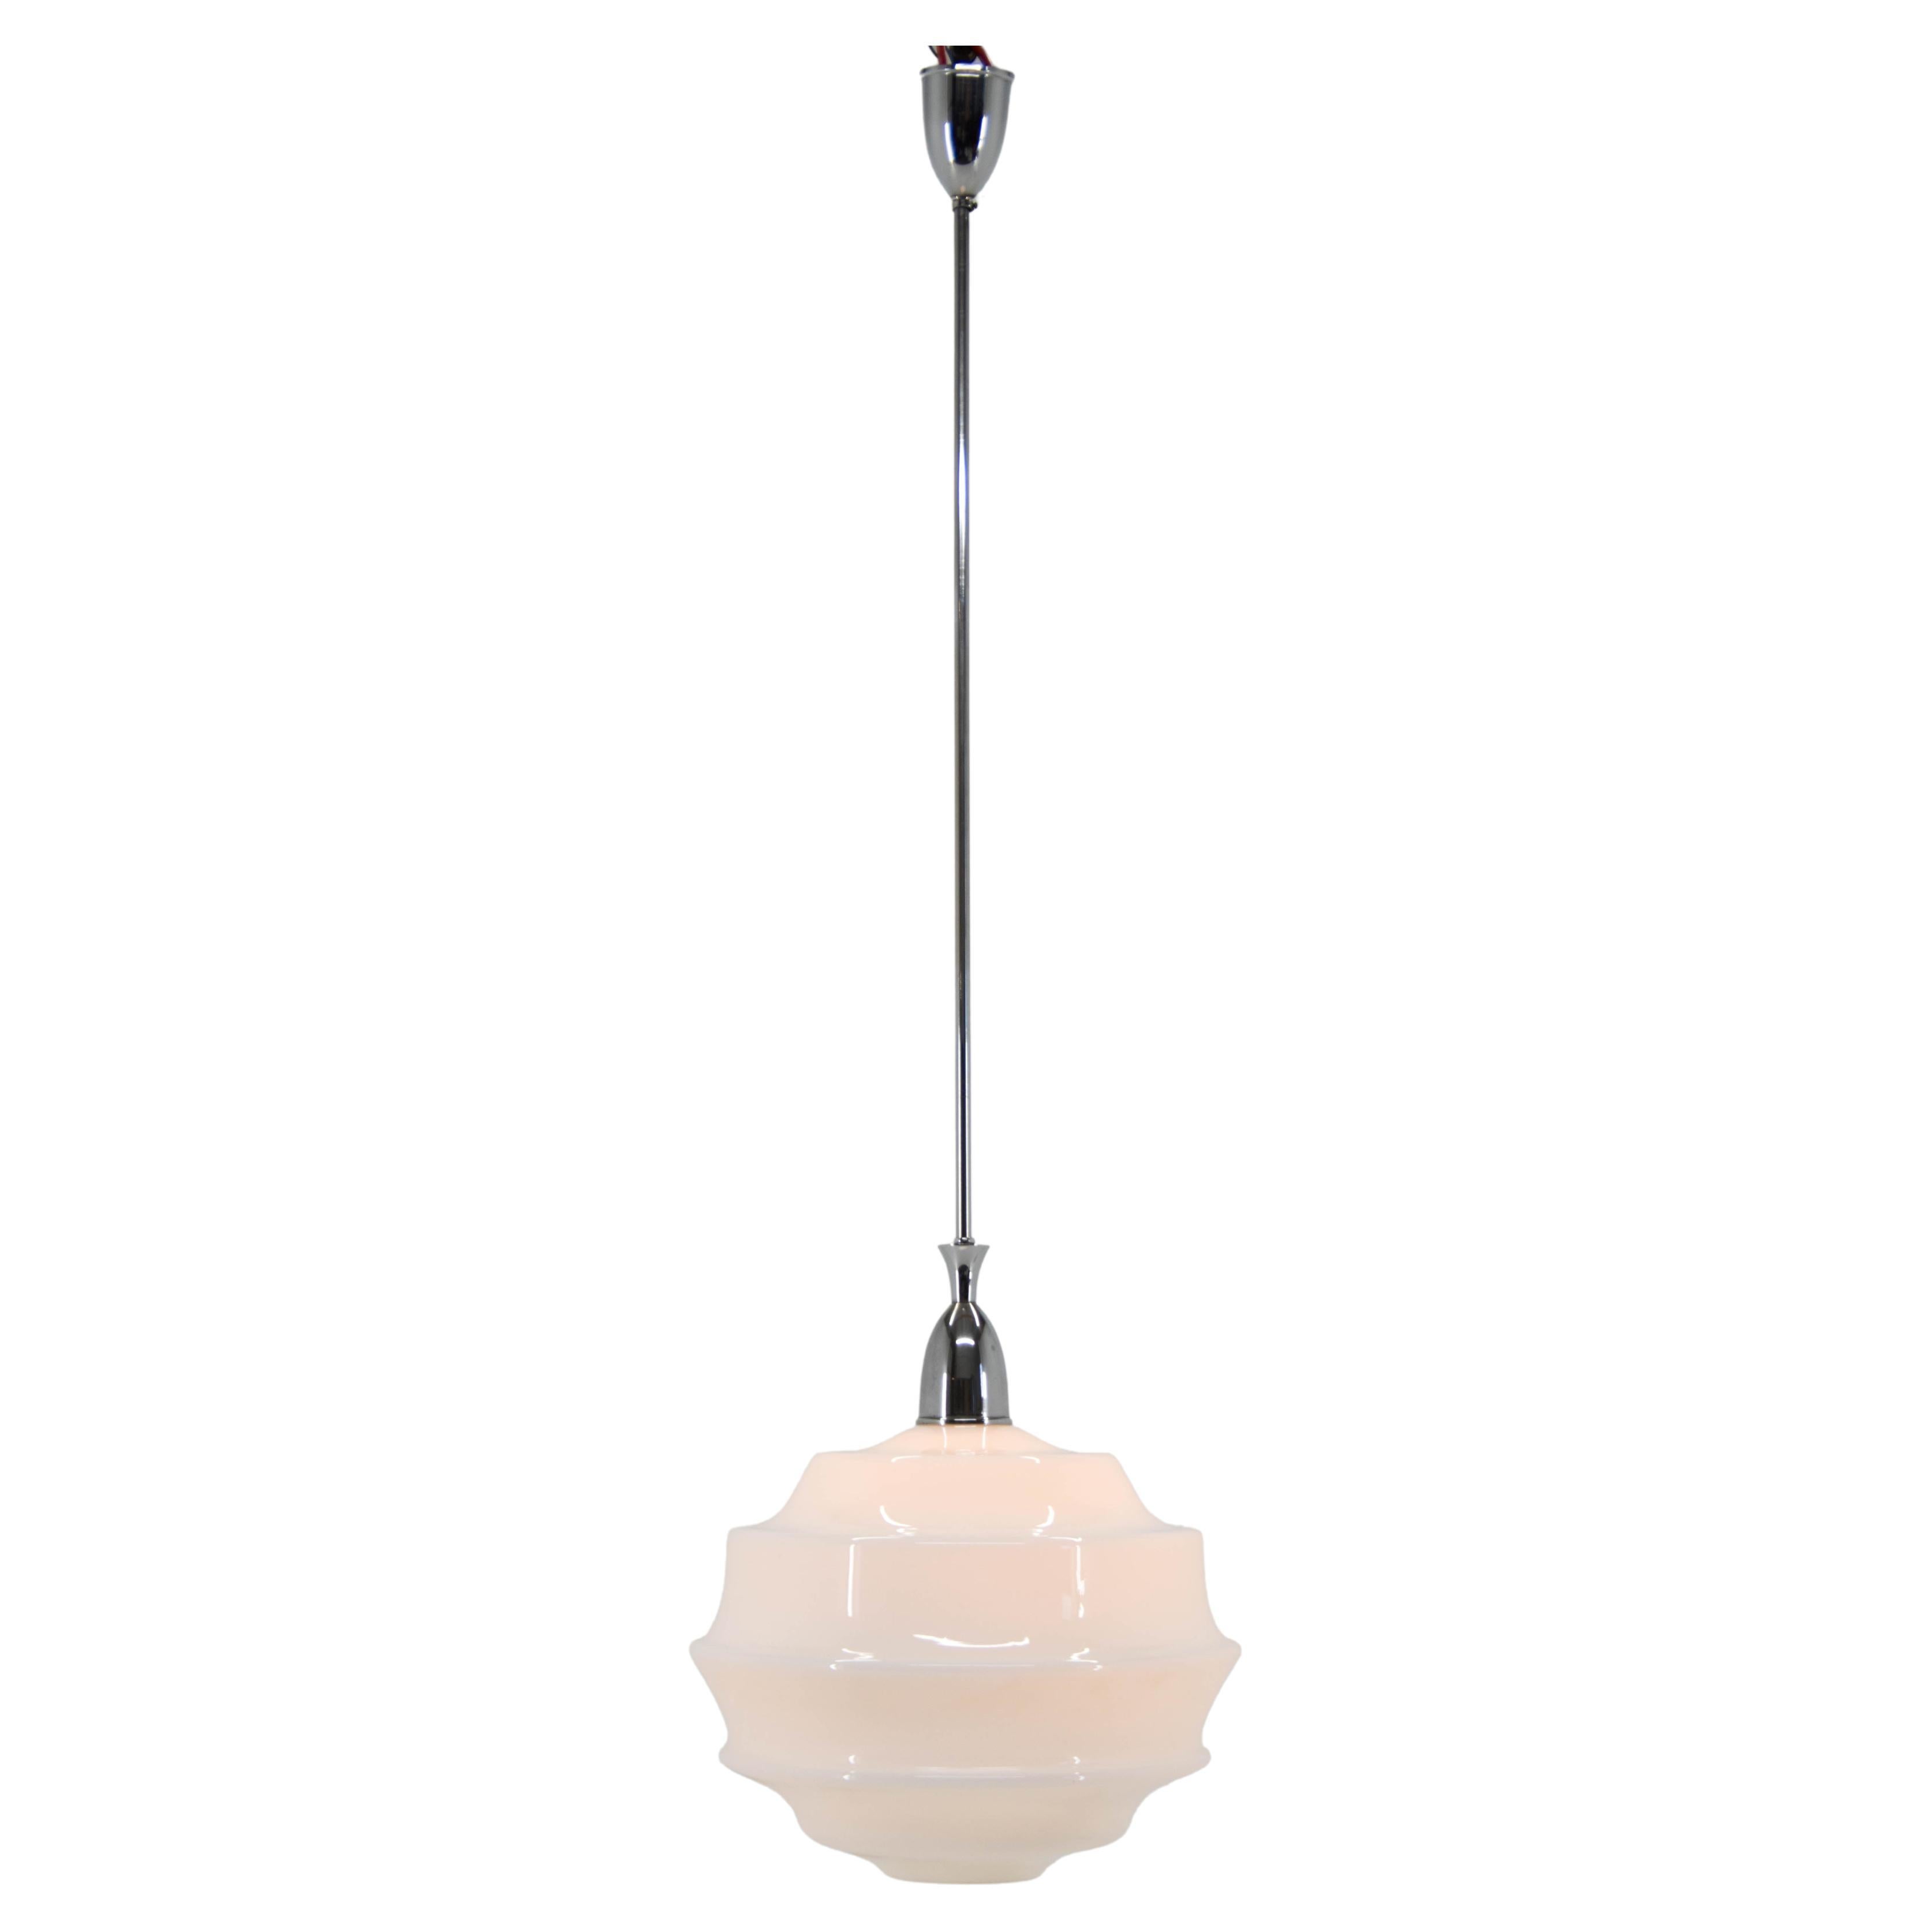 Huge pendant with glass shade in an unusual shape.
Chrome rod and canopy ceiling
Central rod can be shorten on request
Rewired
1x100W, E25-E27 bulb
US wiring compatible.